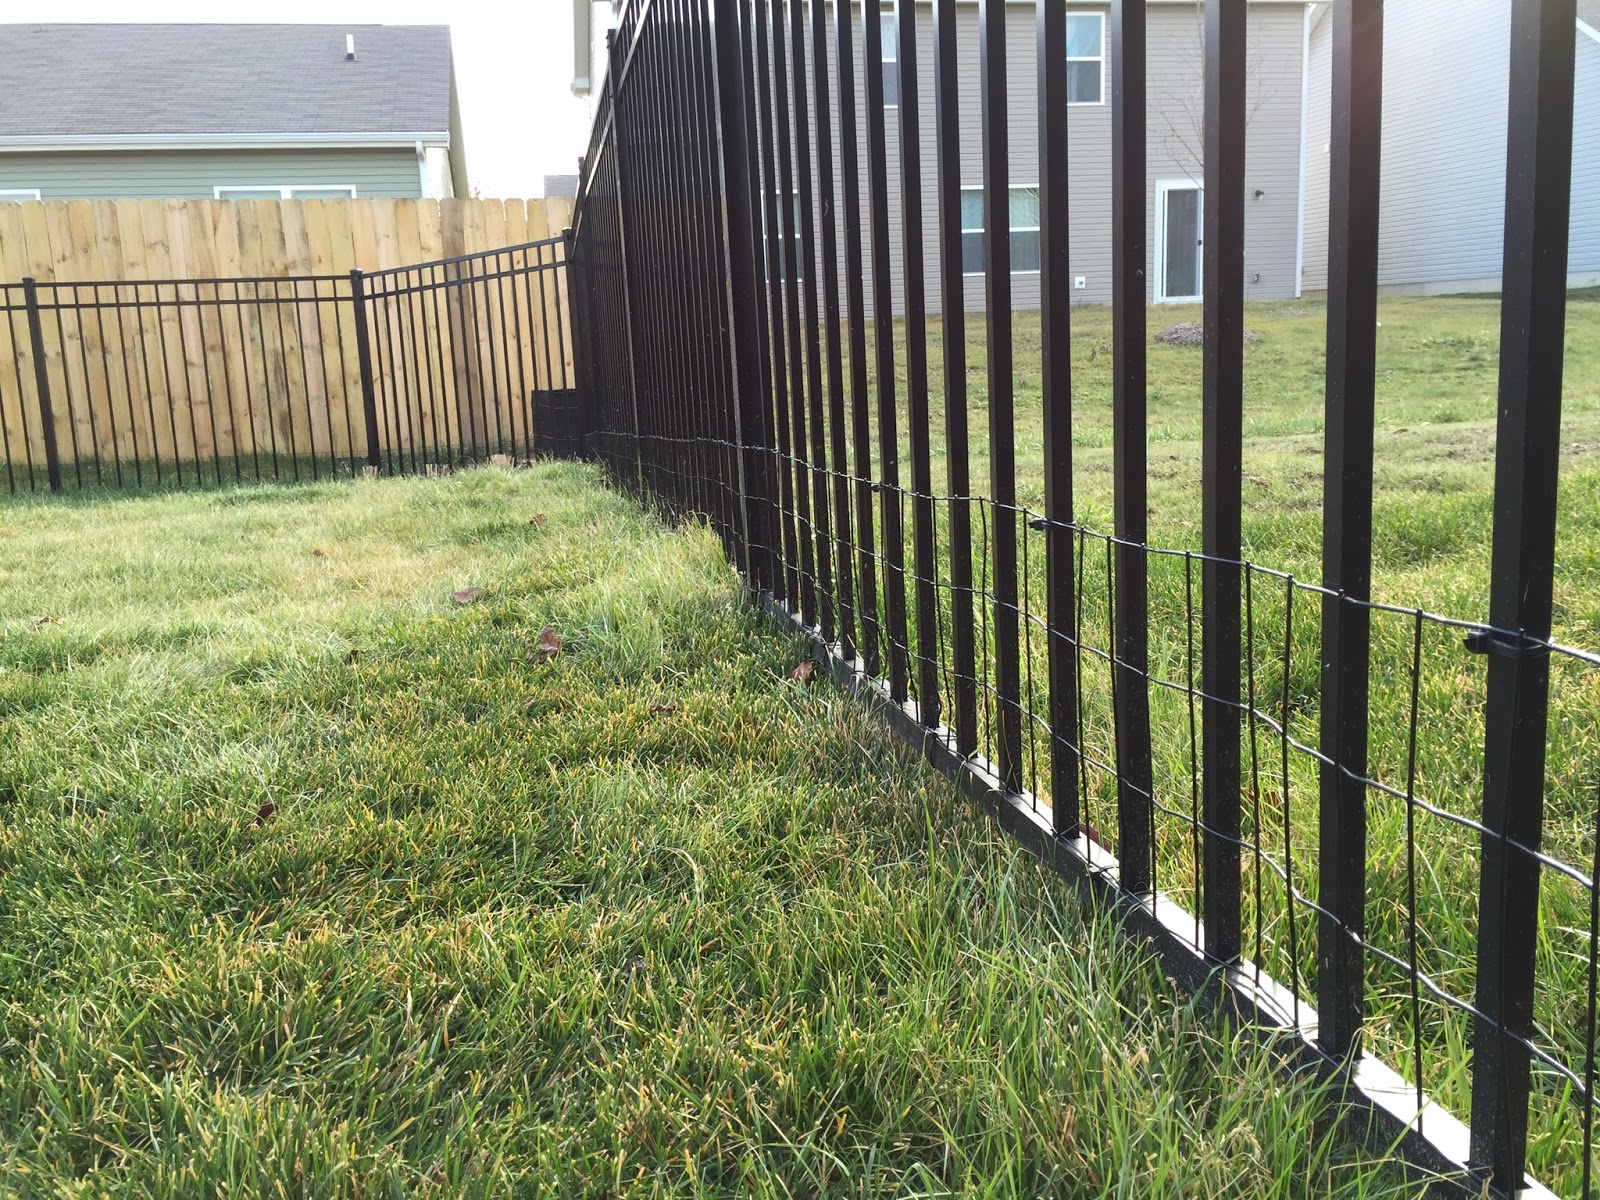 Diy Keep Small Dog In Yard With Welded Wire Aluminum Fence Addition intended for sizing 1600 X 1200